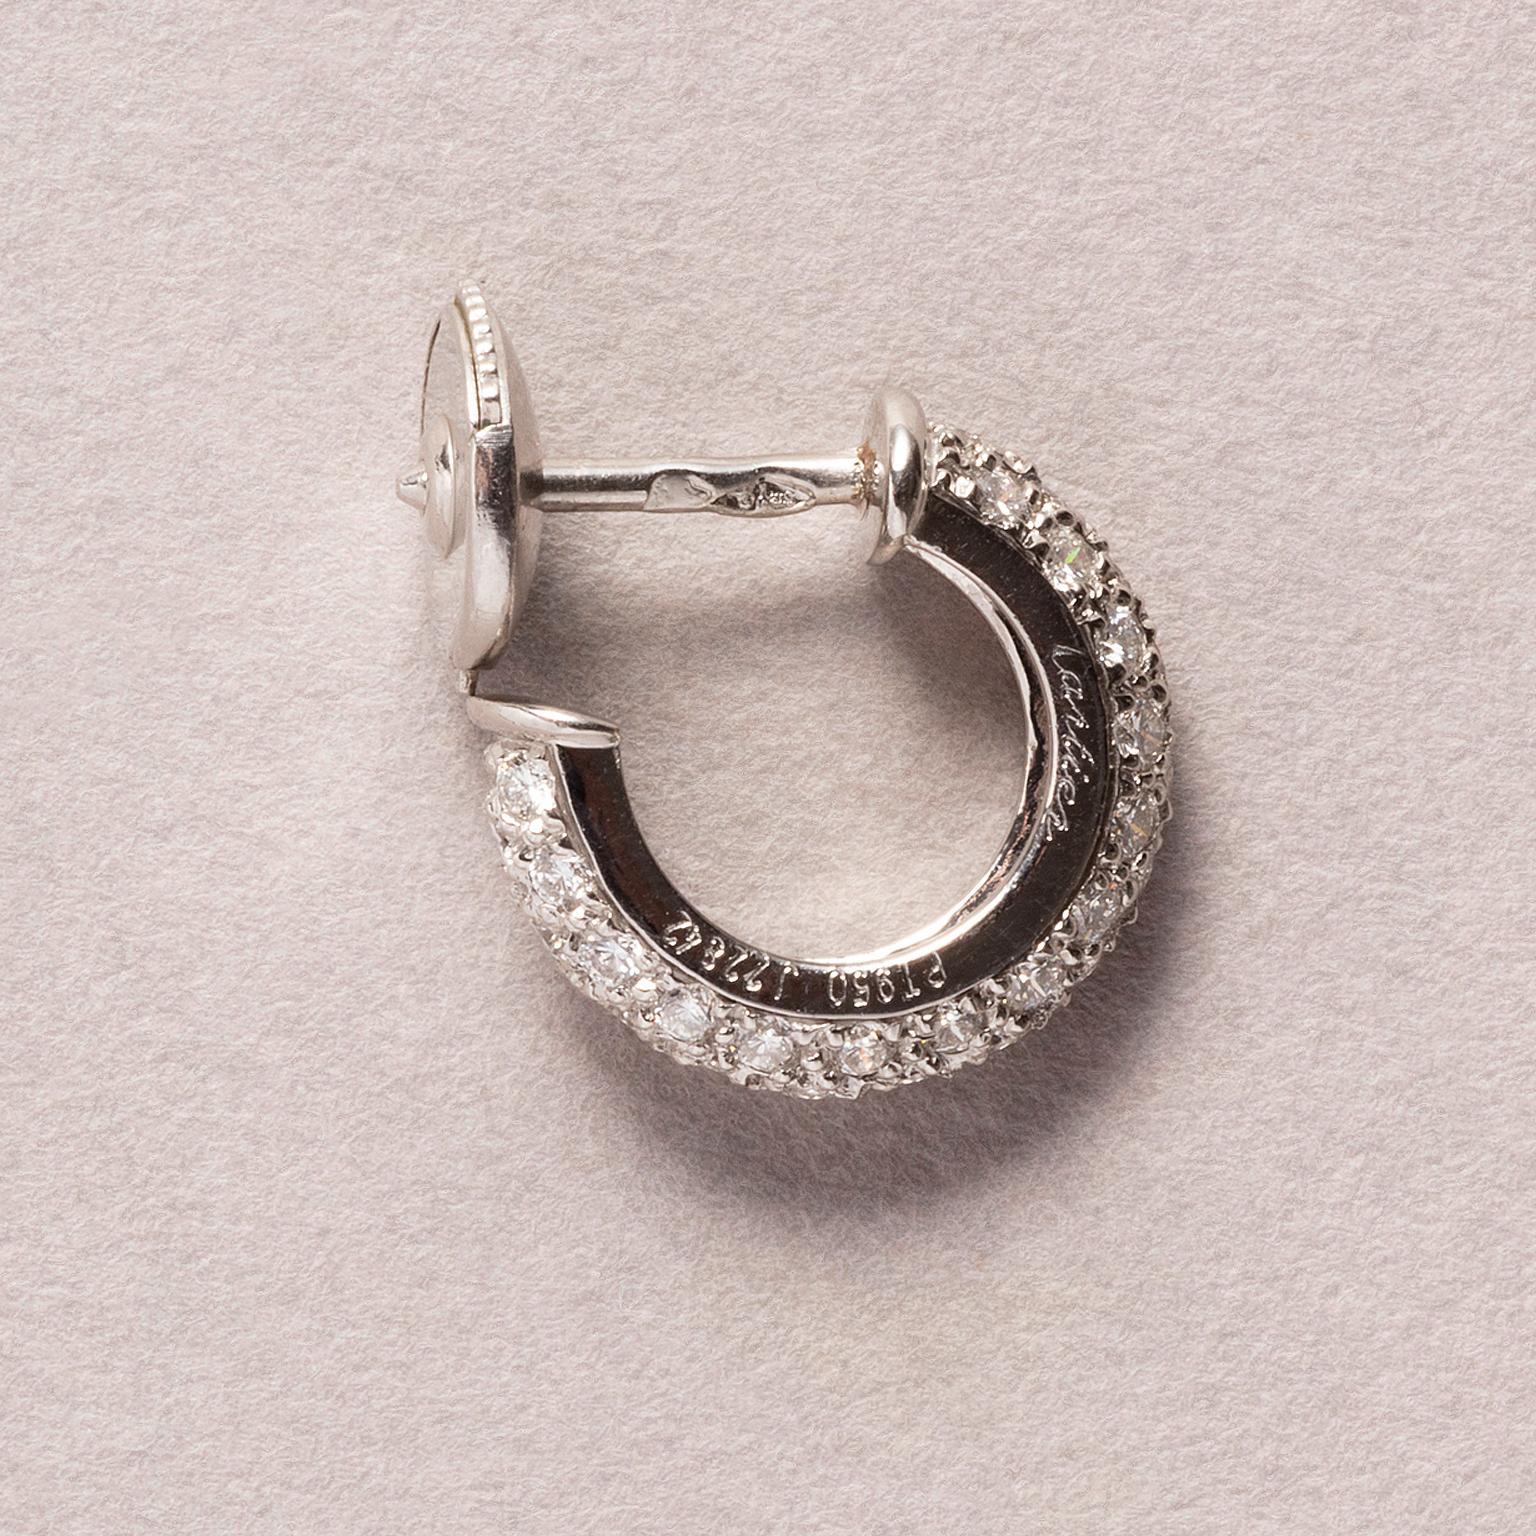 A pair of small platinum hoop or huggie earrings pavé set with brilliant cut diamonds (app. 0.96 carats). signed and numbered: Cartier, J422842, model Etincelle de Cartier, circa 1990.

weight: 5.14 grams
diameter: 13 mm
width: 0.4 mm